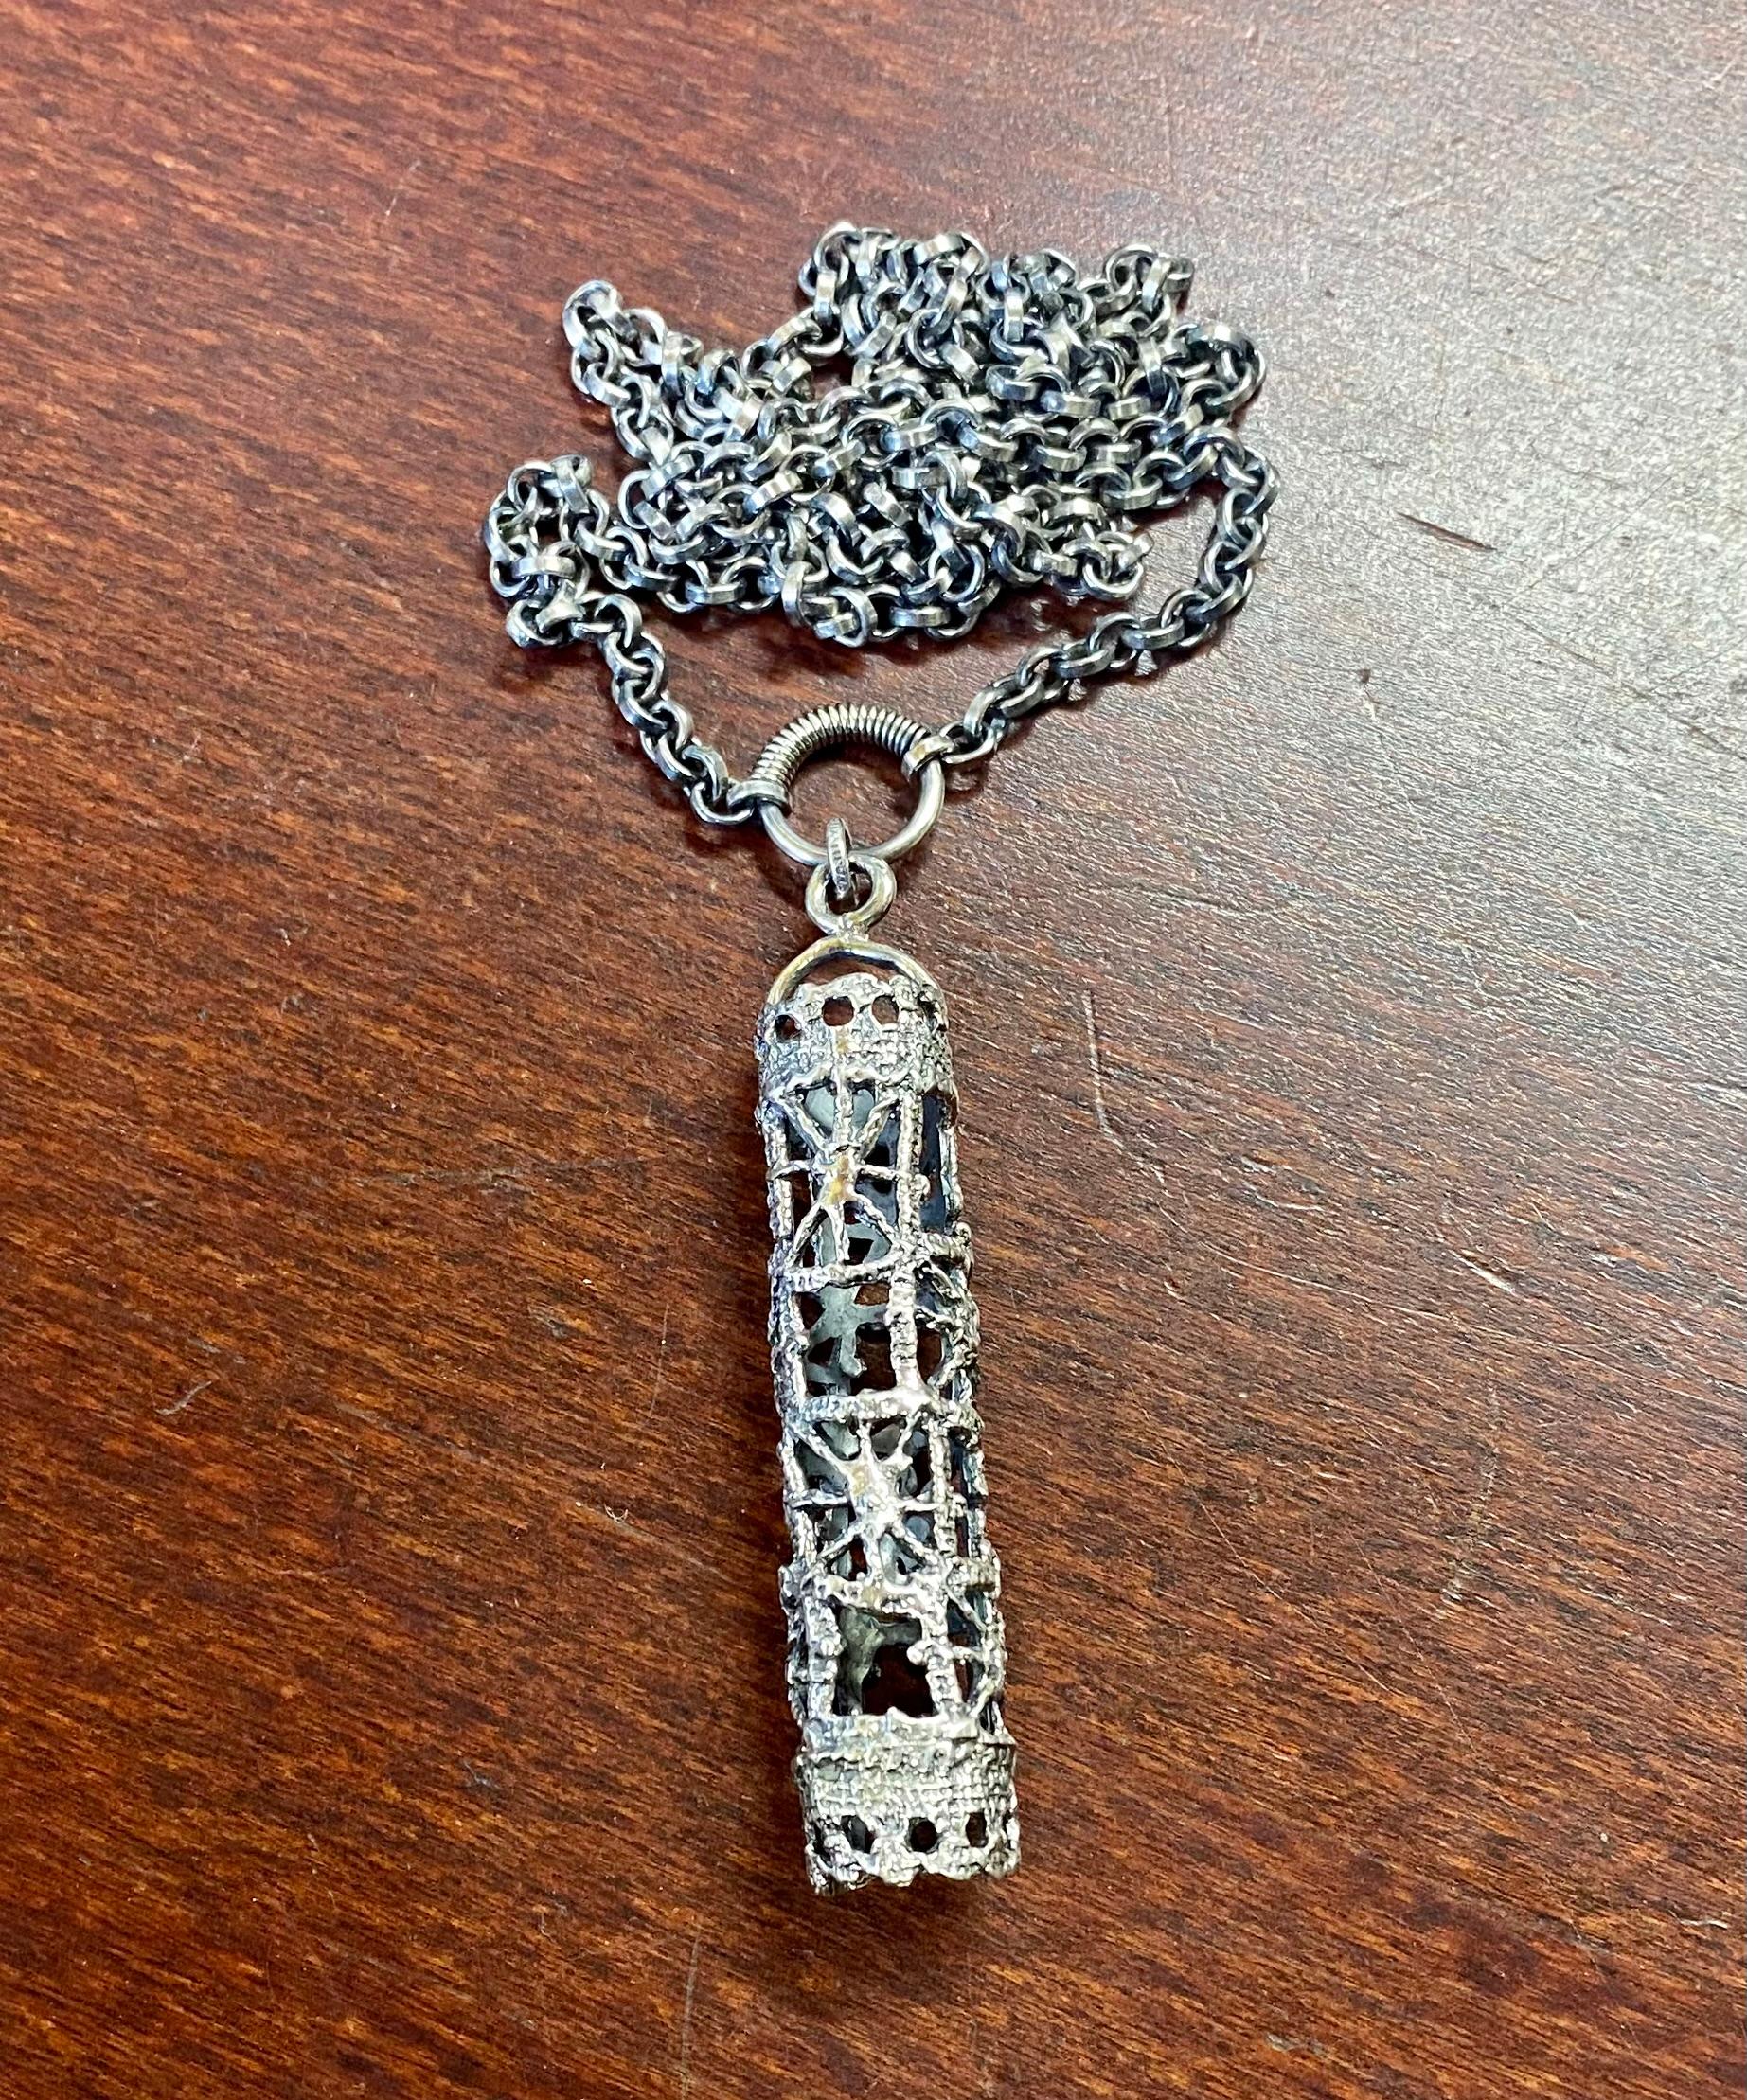 Silver Pentti Sarpaneva 1973 Necklace Goldsmith's old warehouse. Unused

See the pictures.
Been in a box in the back room of the Kultasepä store since 1968
So 55 years.
A rare unused piece of jewelry.

Chain length 60cm
Pendant length 5cm
With loops